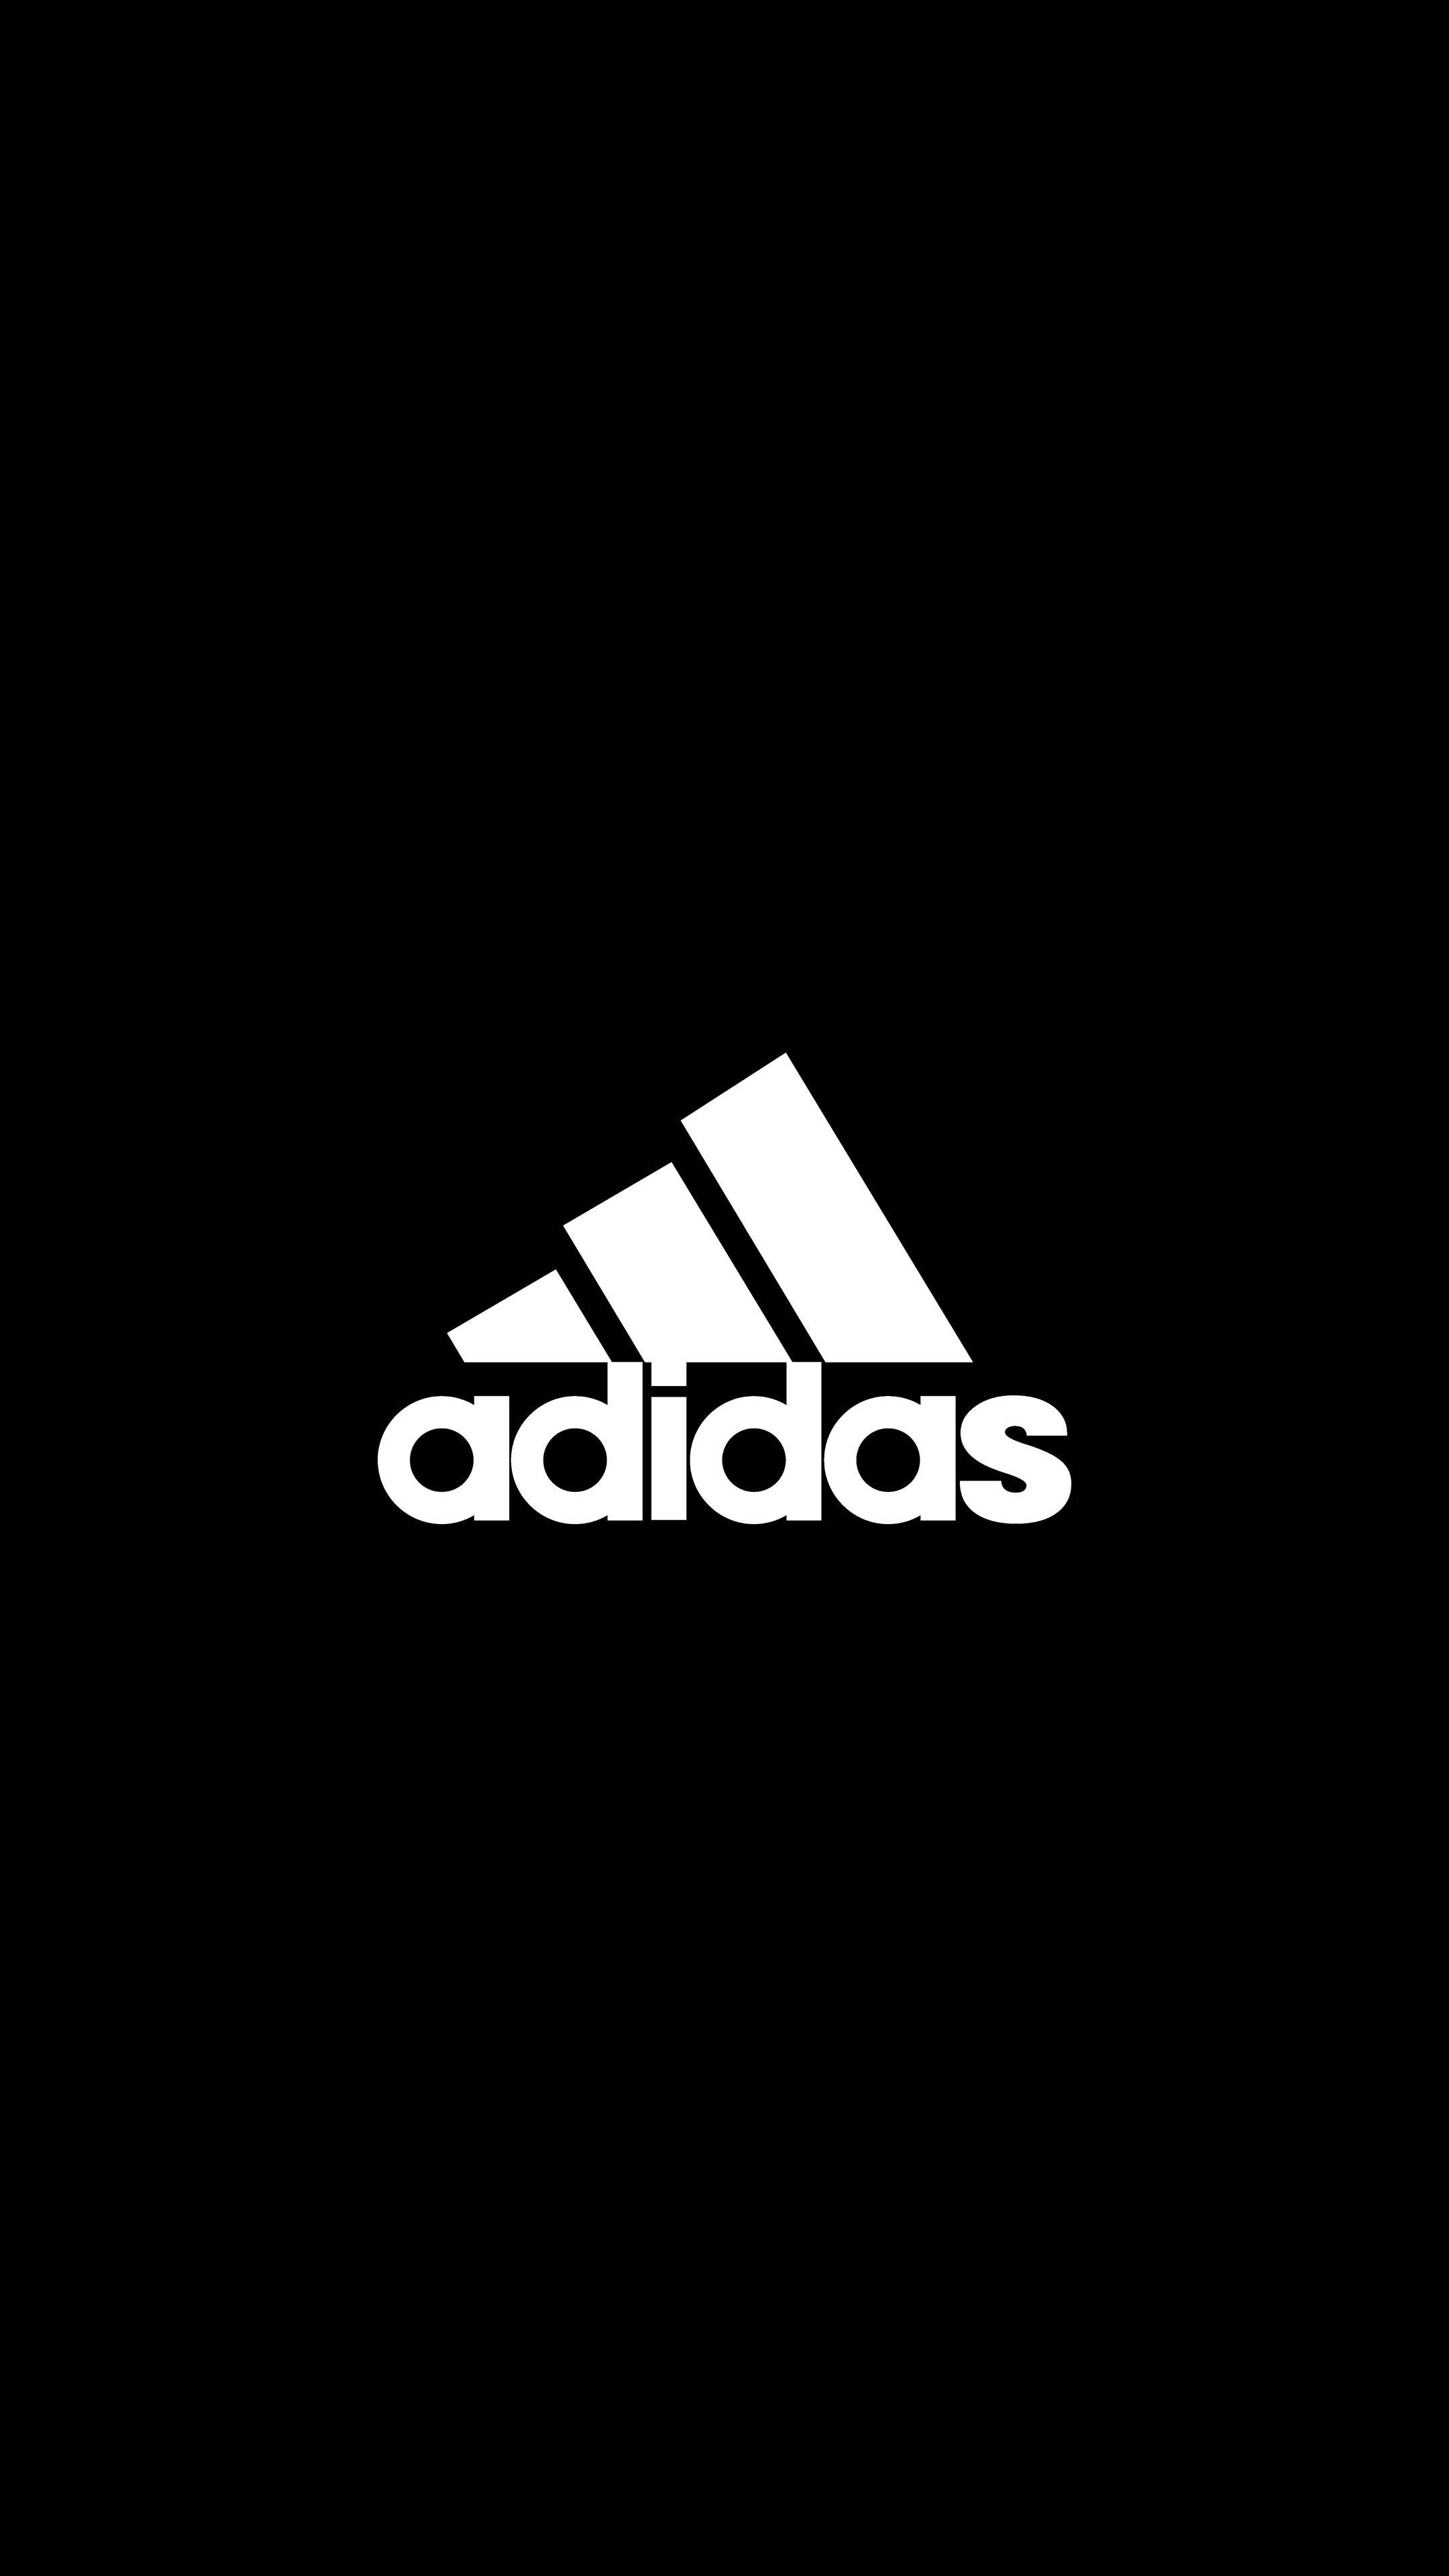 Logo Adidas Wallpapers (36+ images inside)